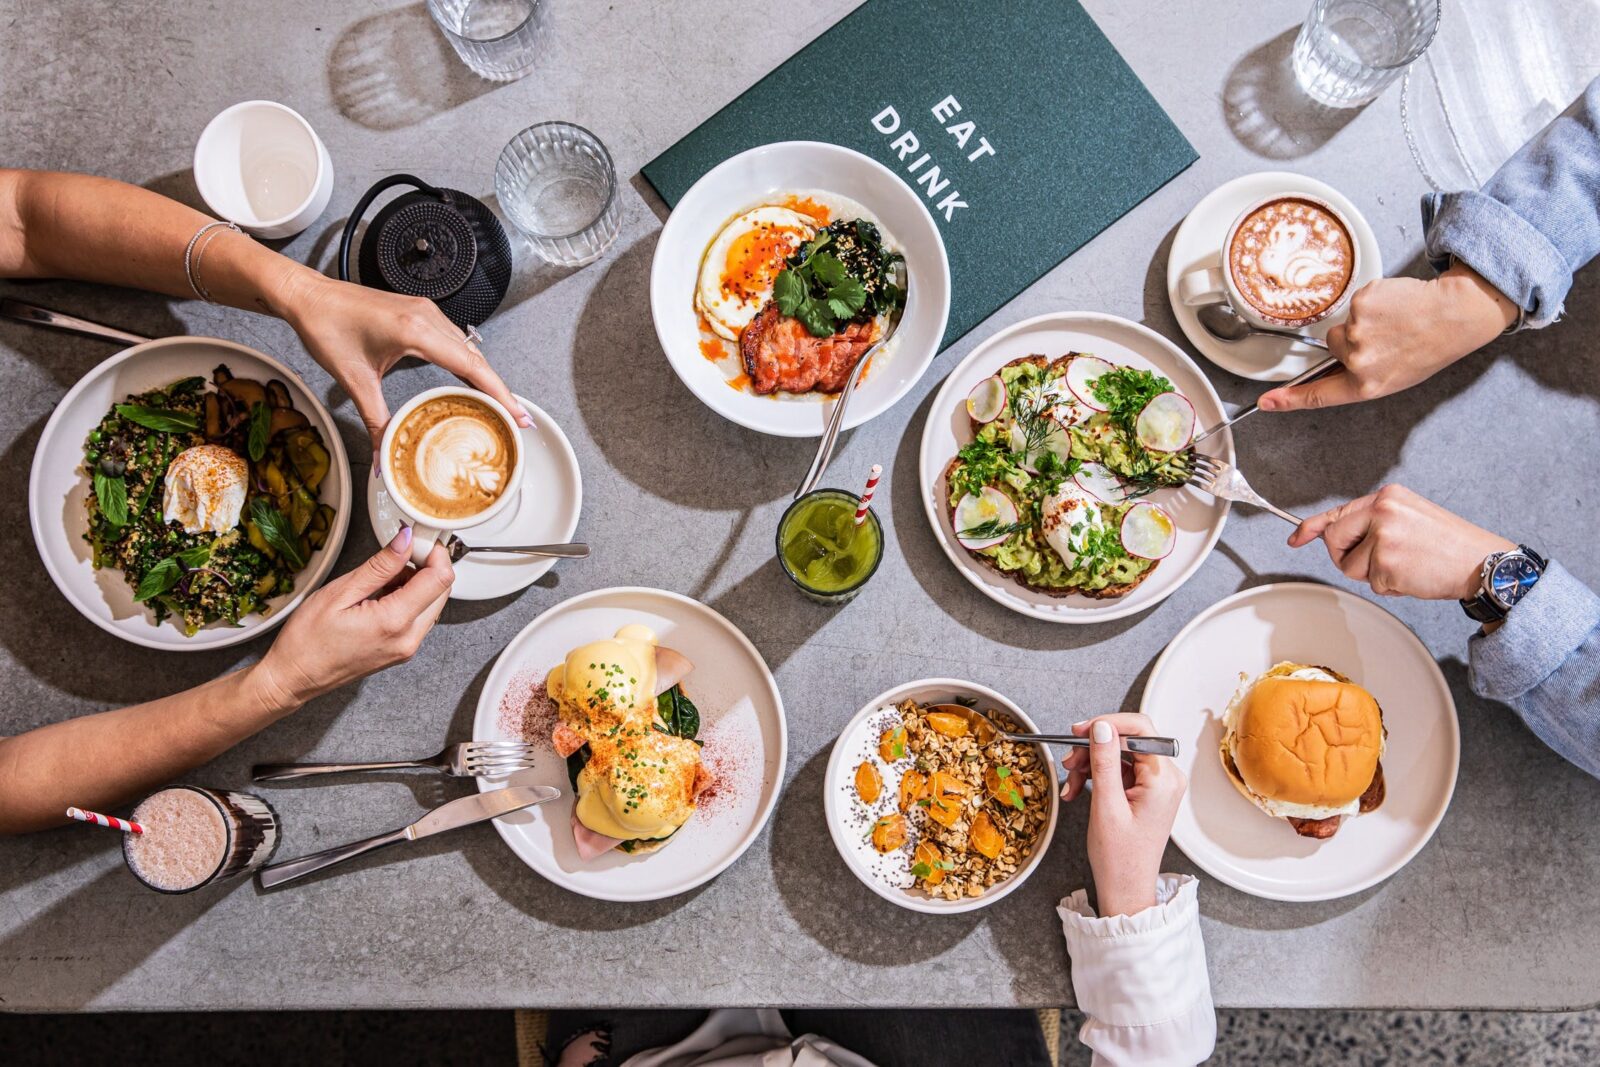 Flatlay photo of multiple dishes with three sets of hands eating the food